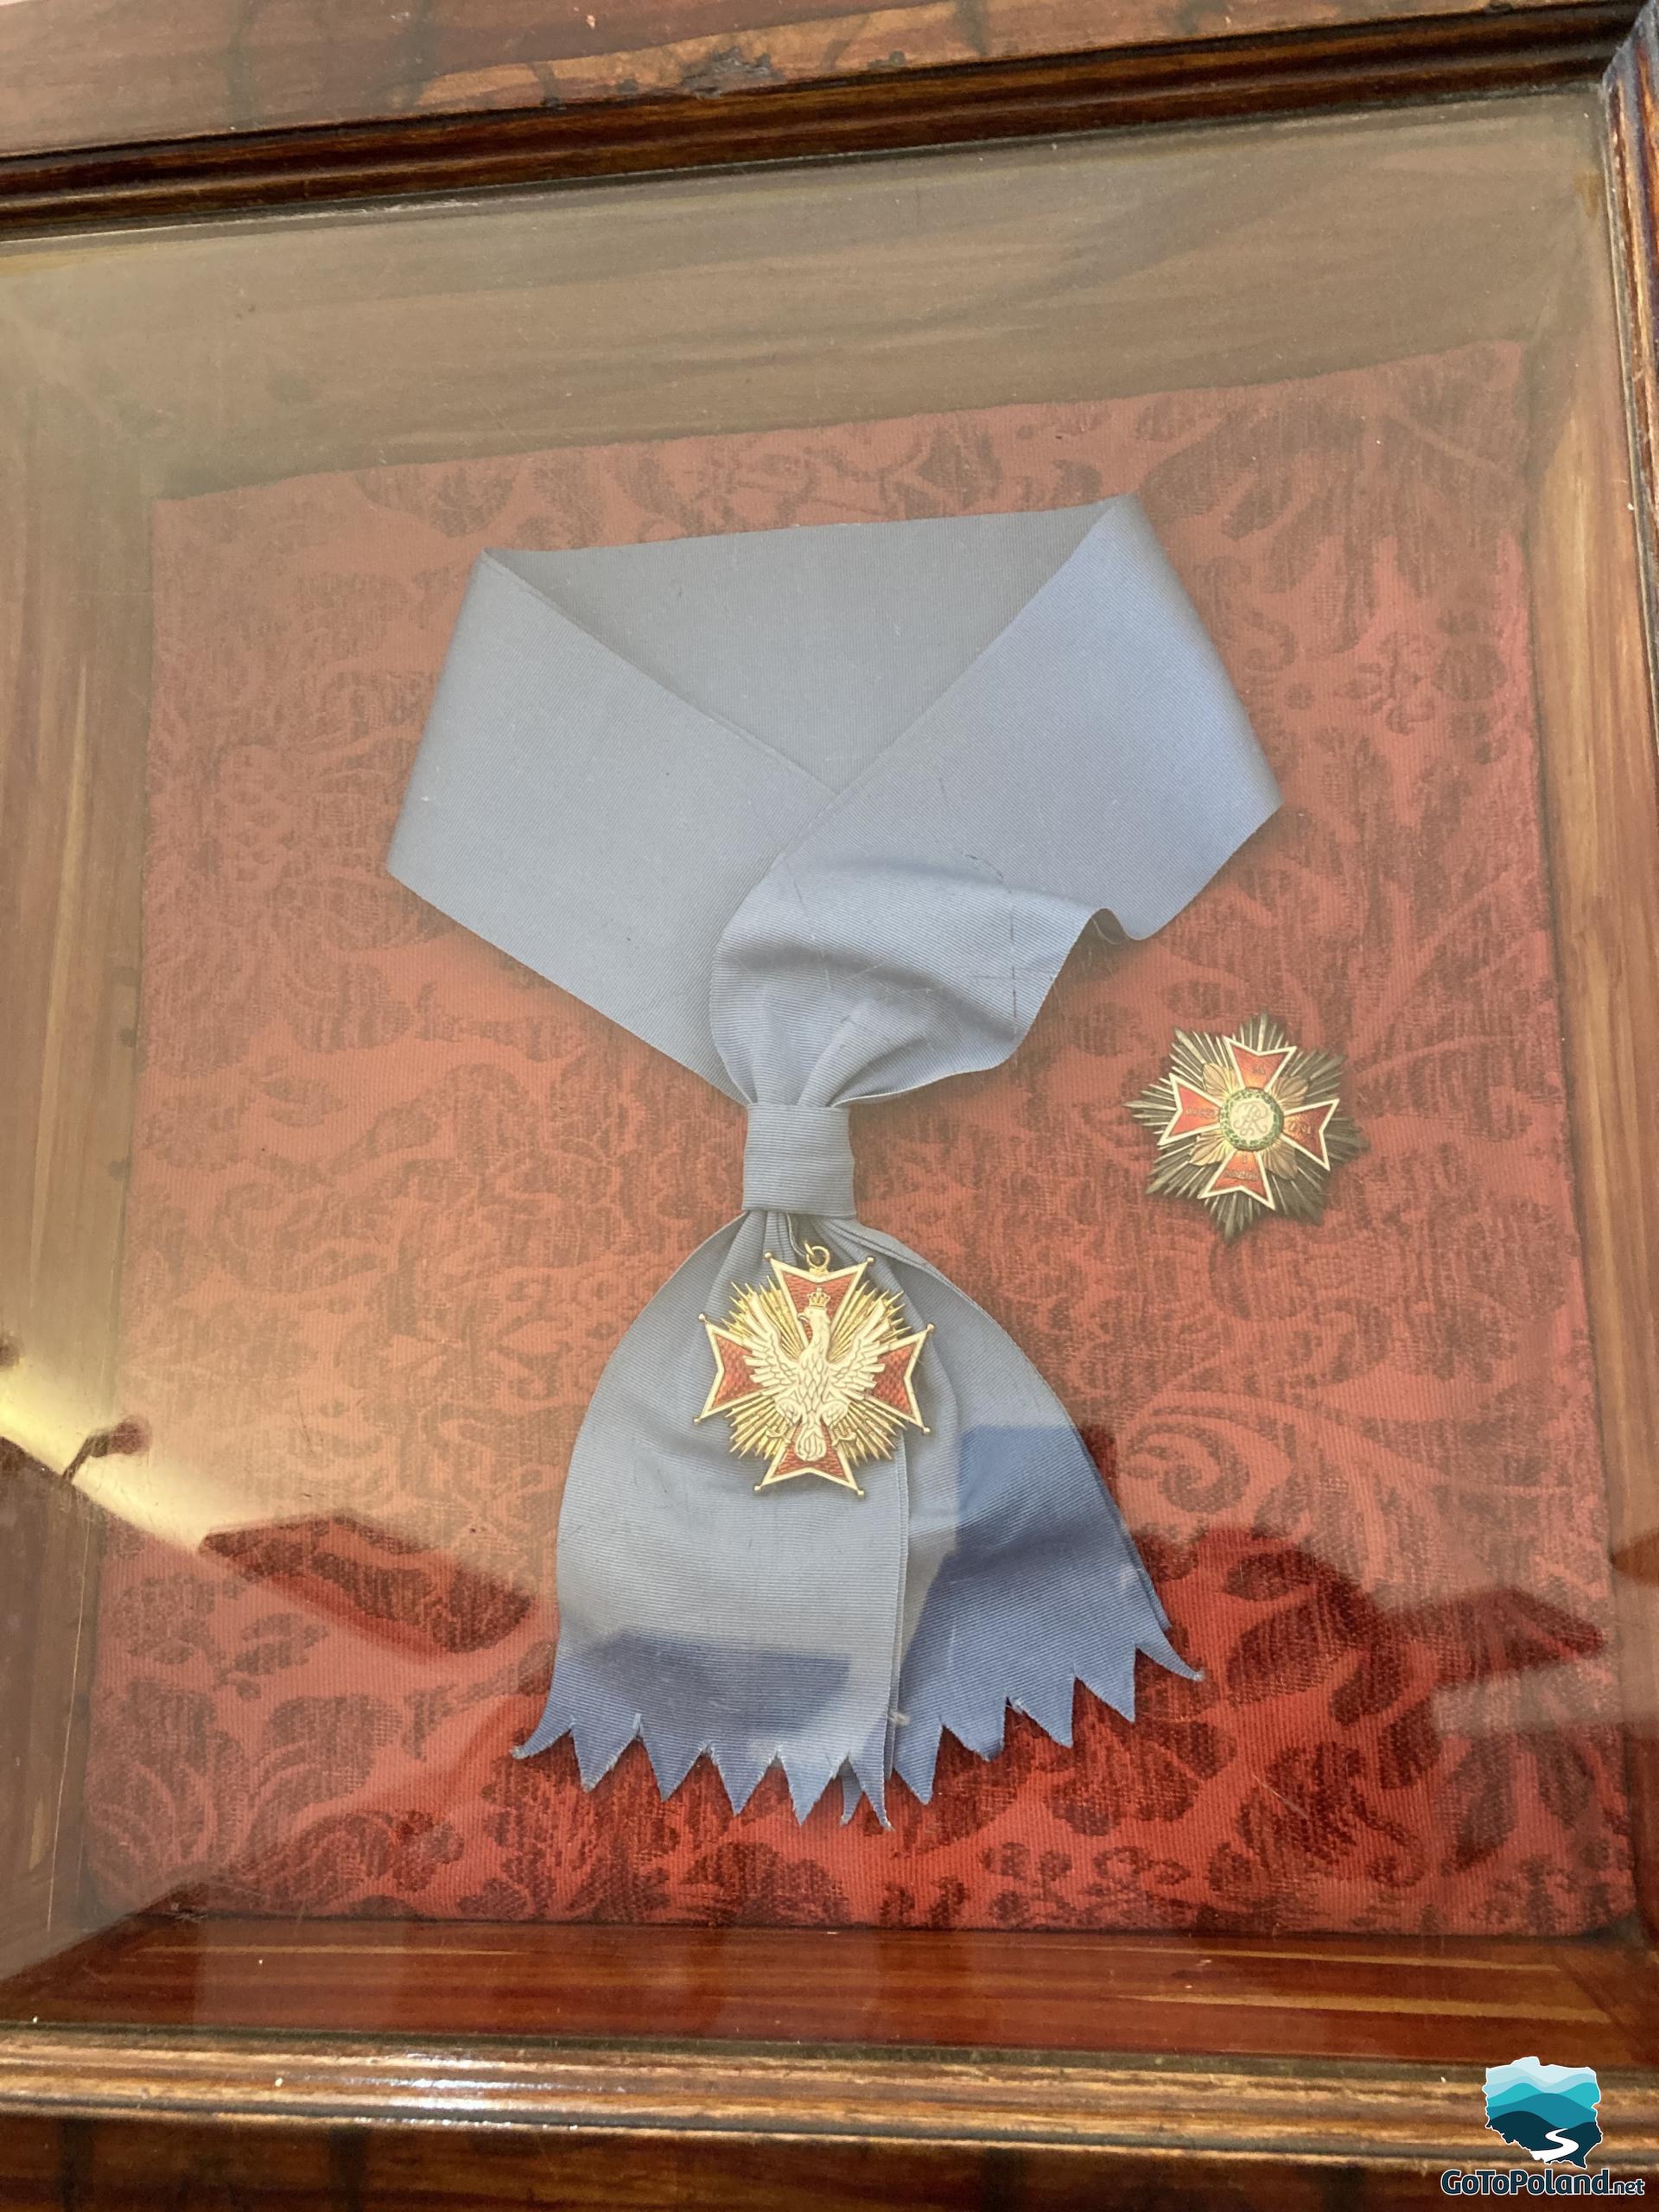 in a frame on a red fabric and a blue sash lies the Order of the White Eagle